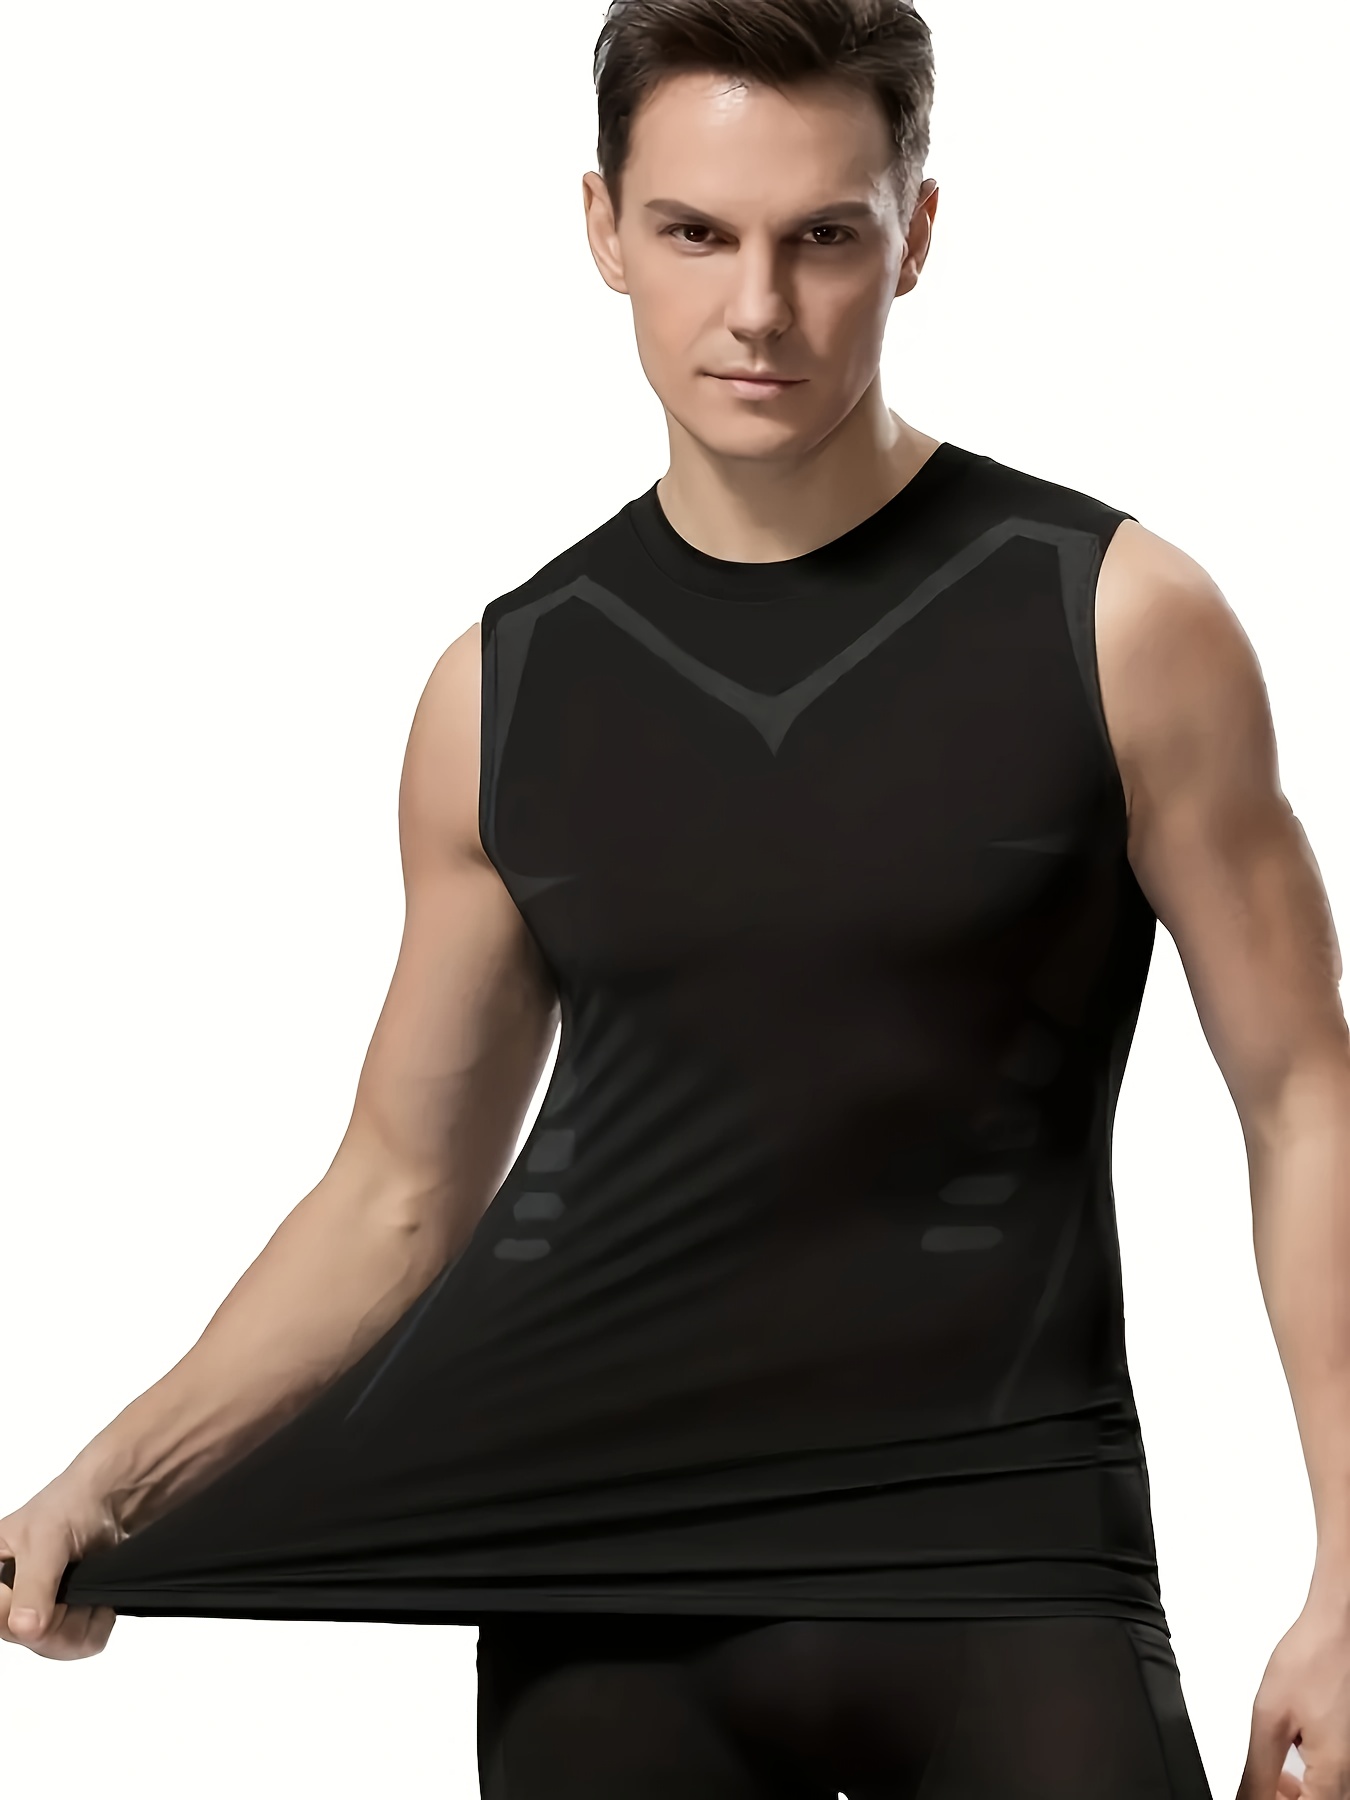 Men's Workout Tank Tops Athletic Compression Sleeveless T-Shirts Fitness  Bodybuilding Muscle Shirt Stretch Quick Dry Basketball Vest 